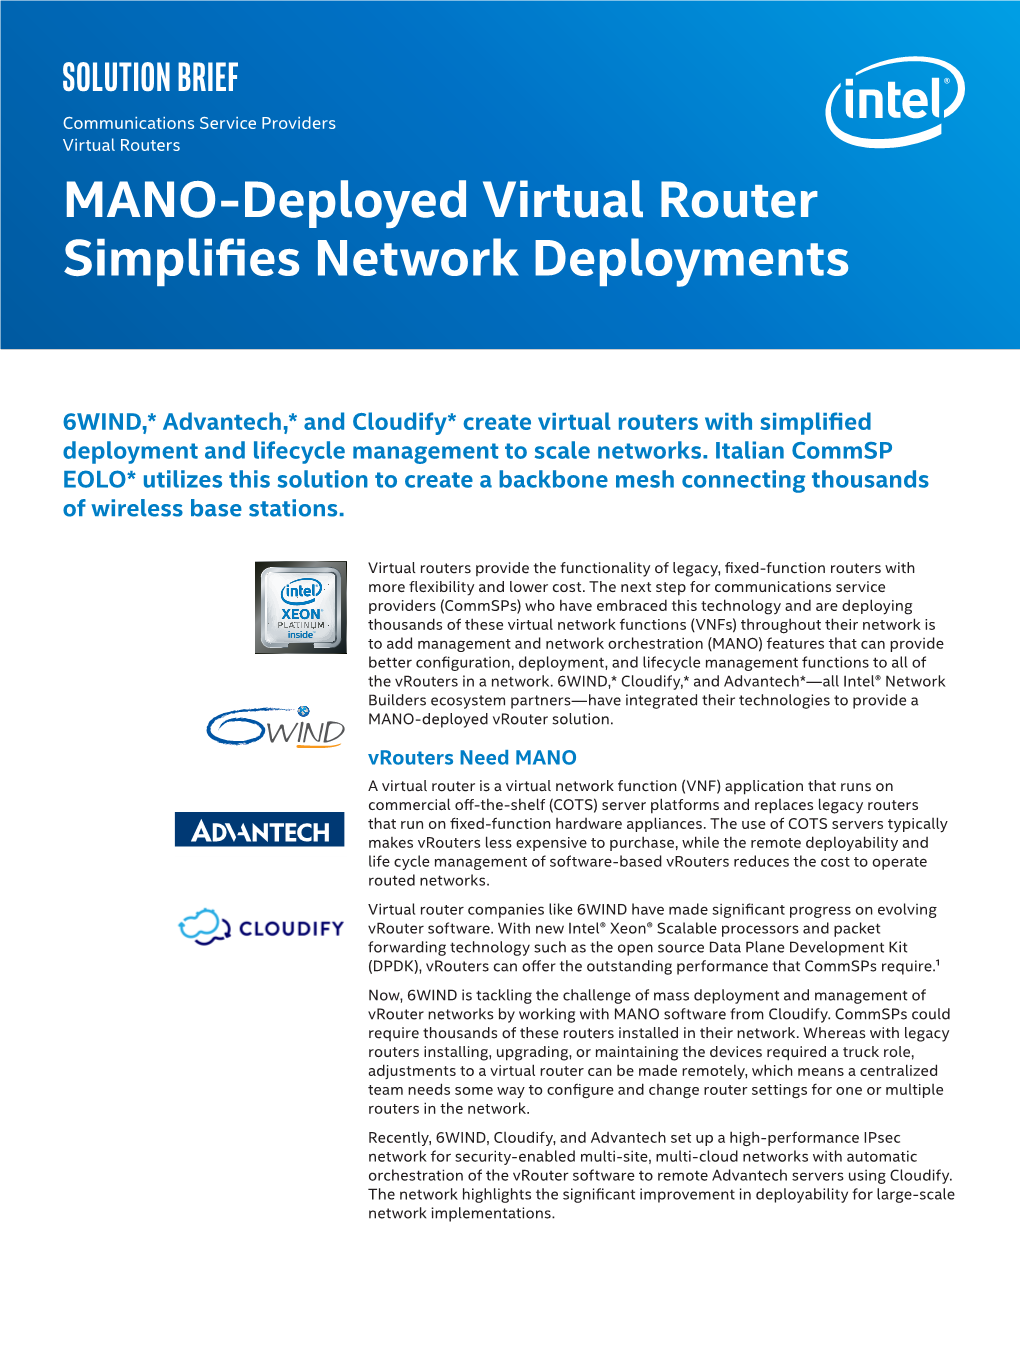 MANO-Deployed Virtual Router Simplifies Network Deployments